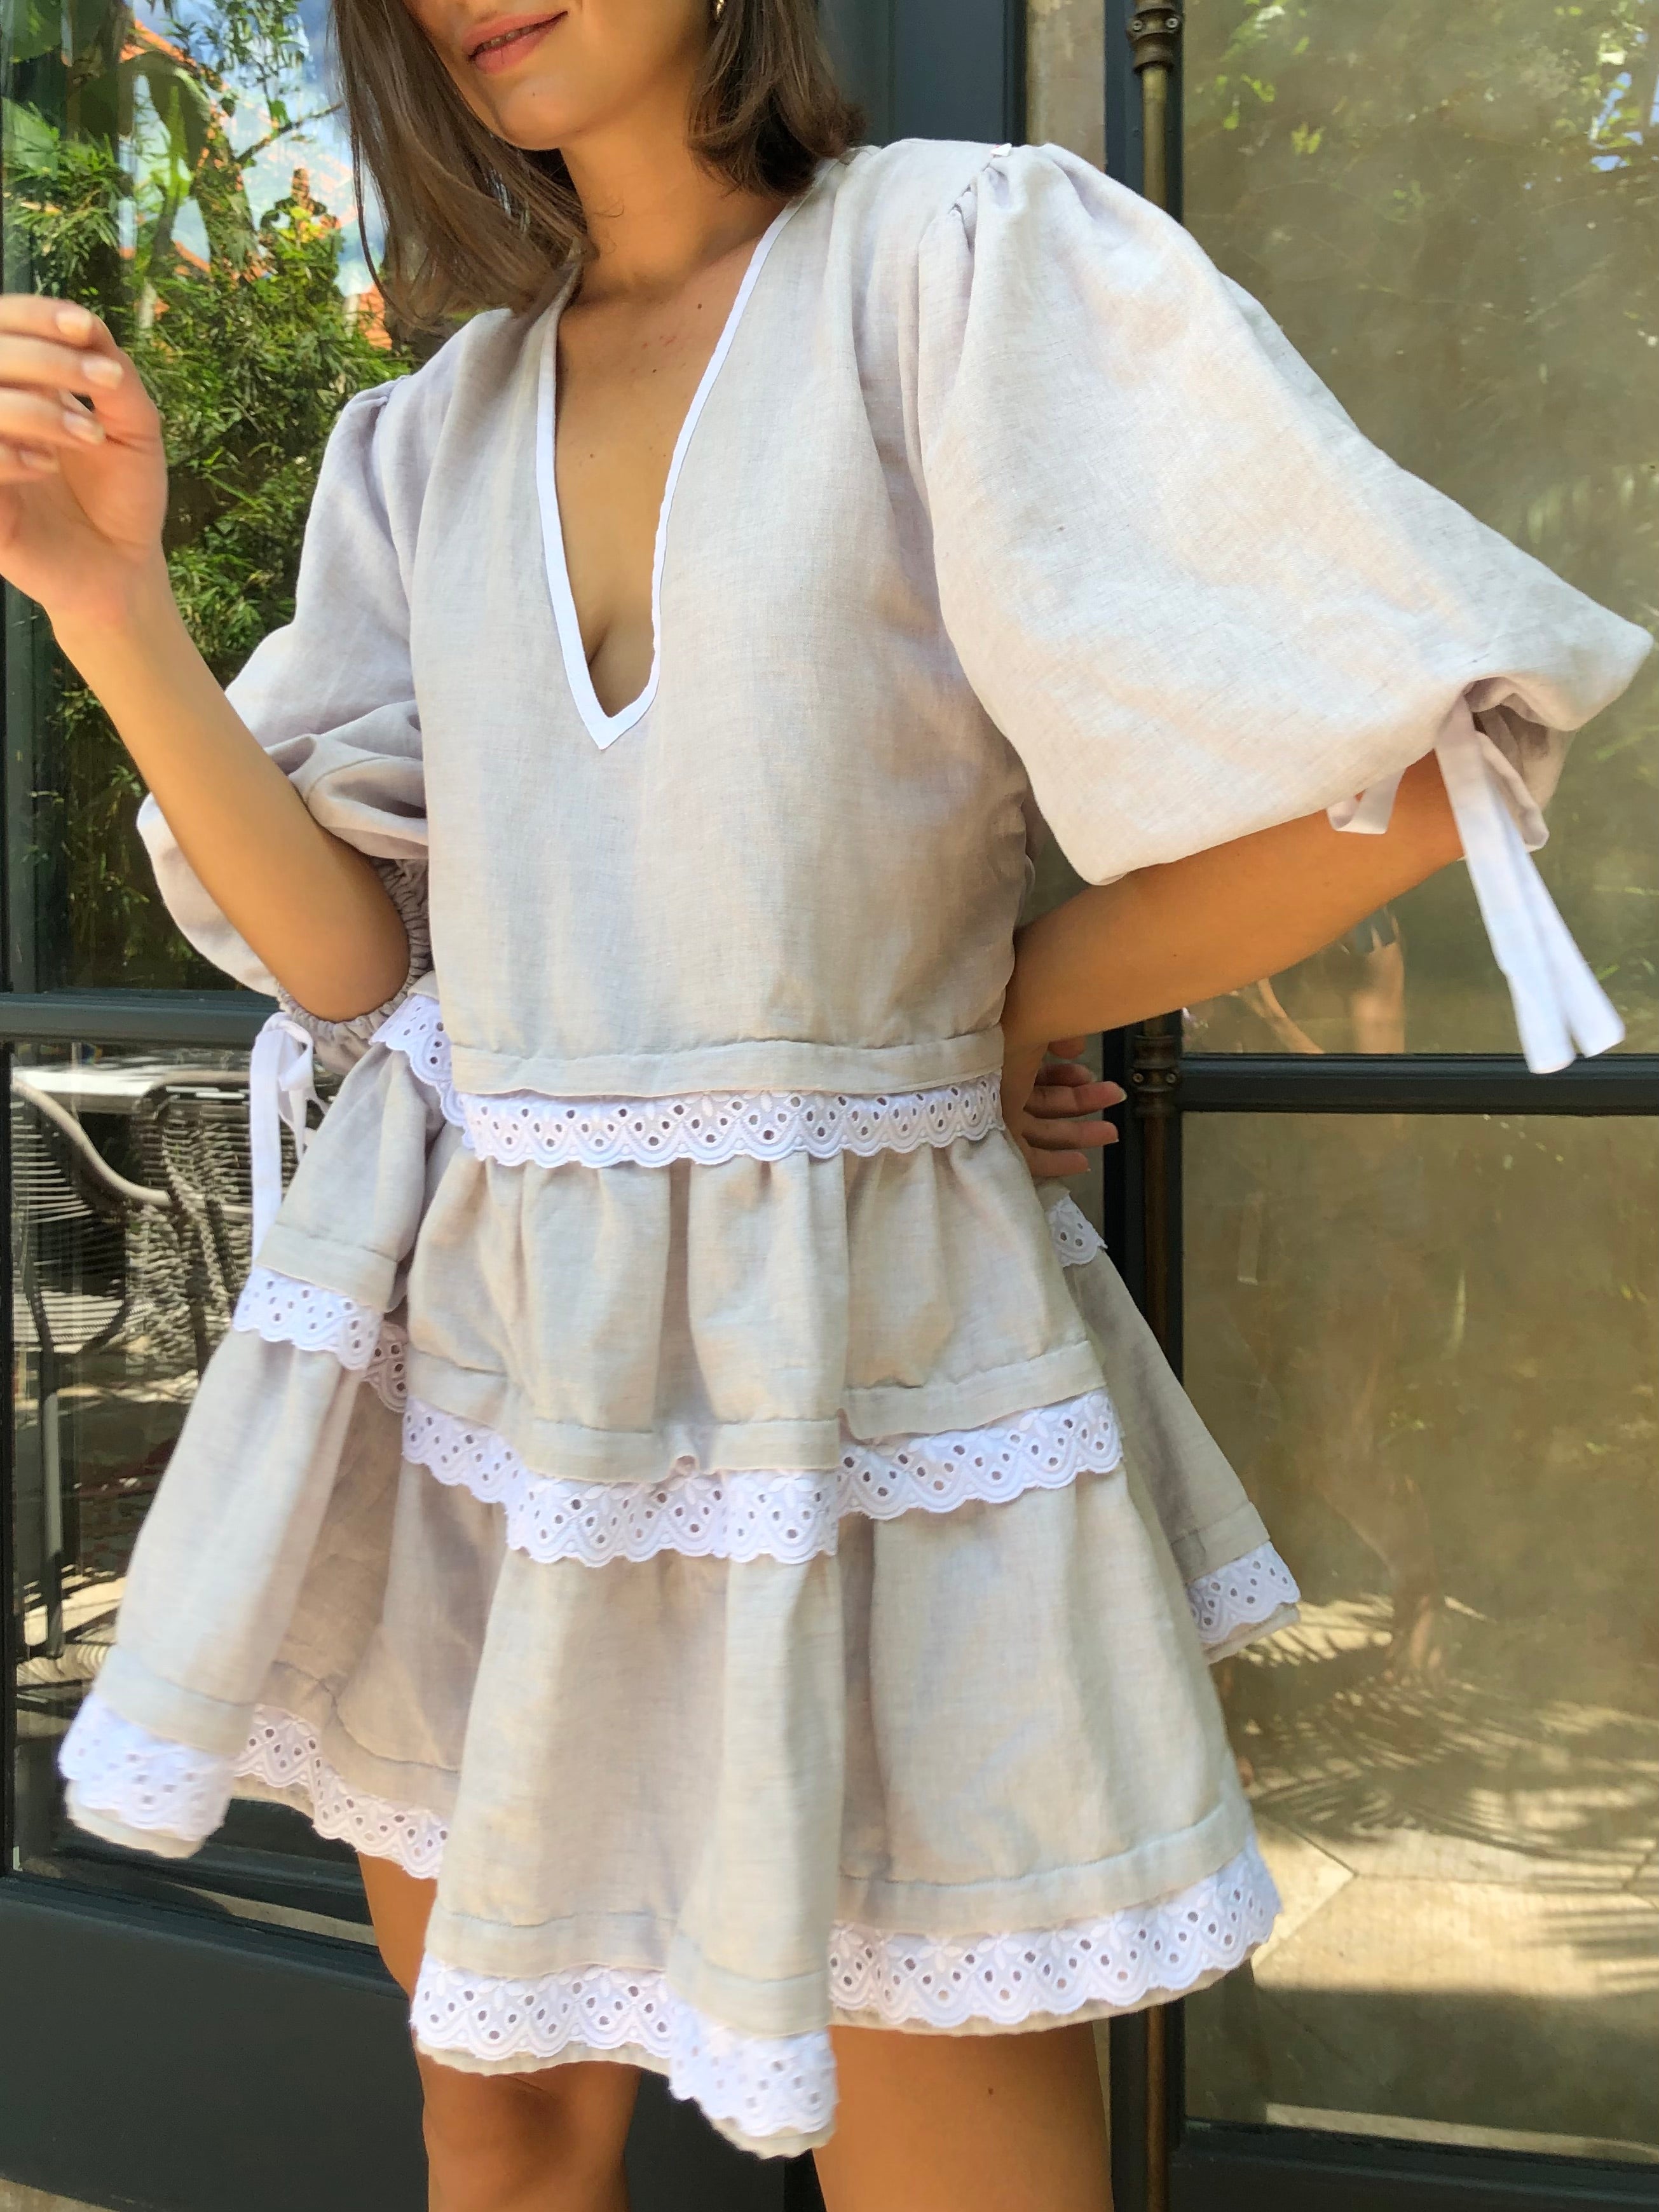 SMOCK DRESS by Puka the Label